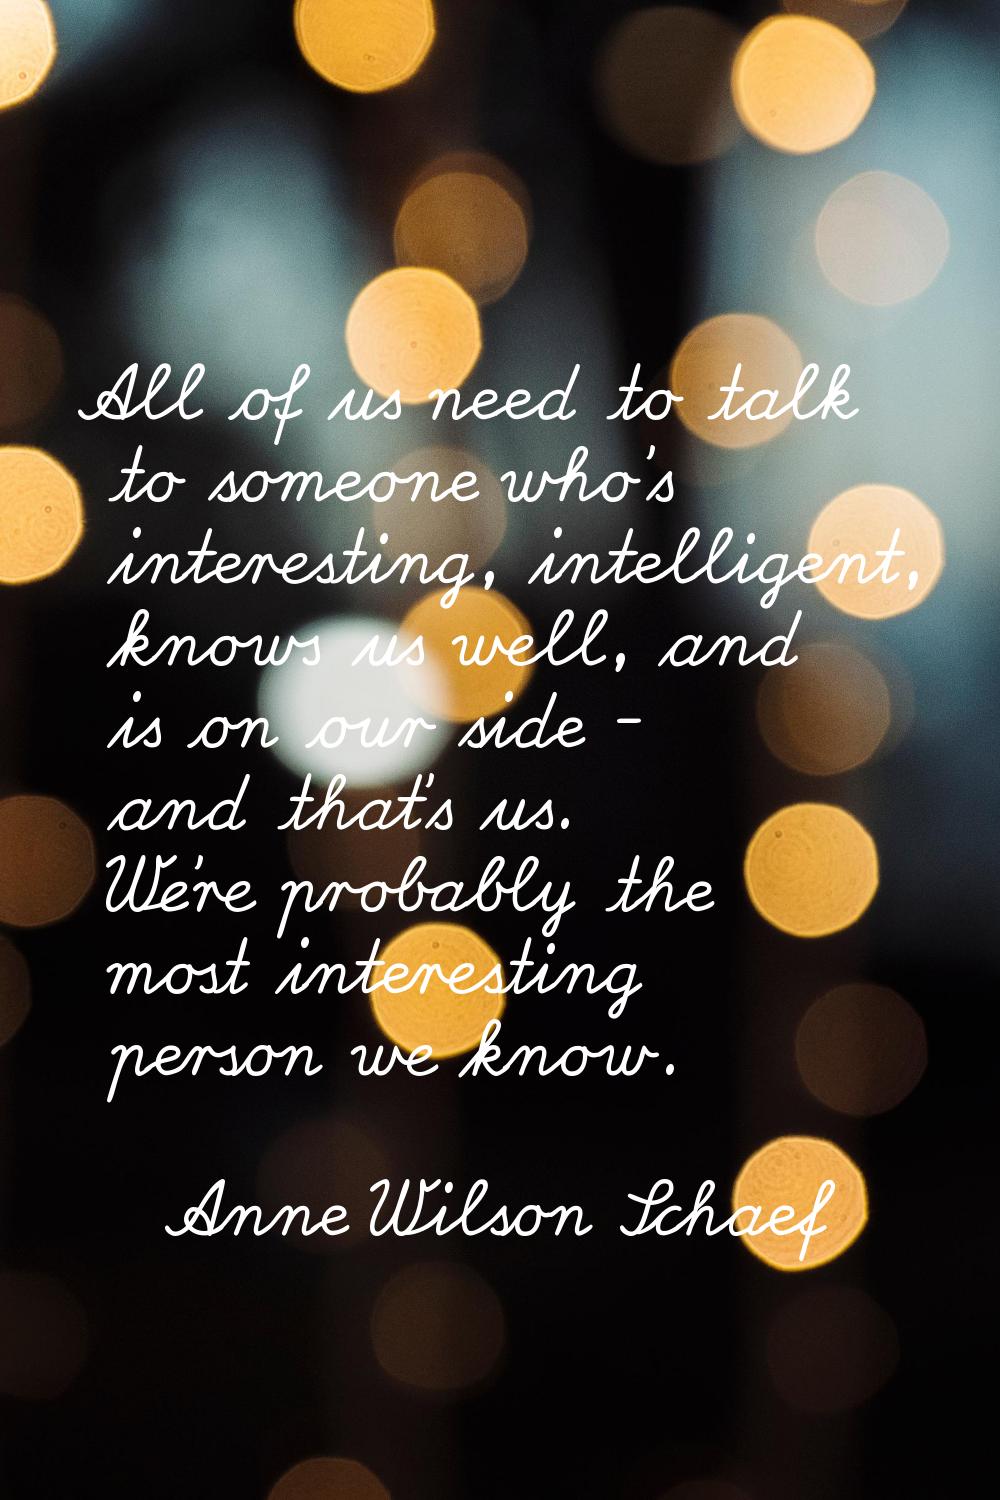 All of us need to talk to someone who's interesting, intelligent, knows us well, and is on our side